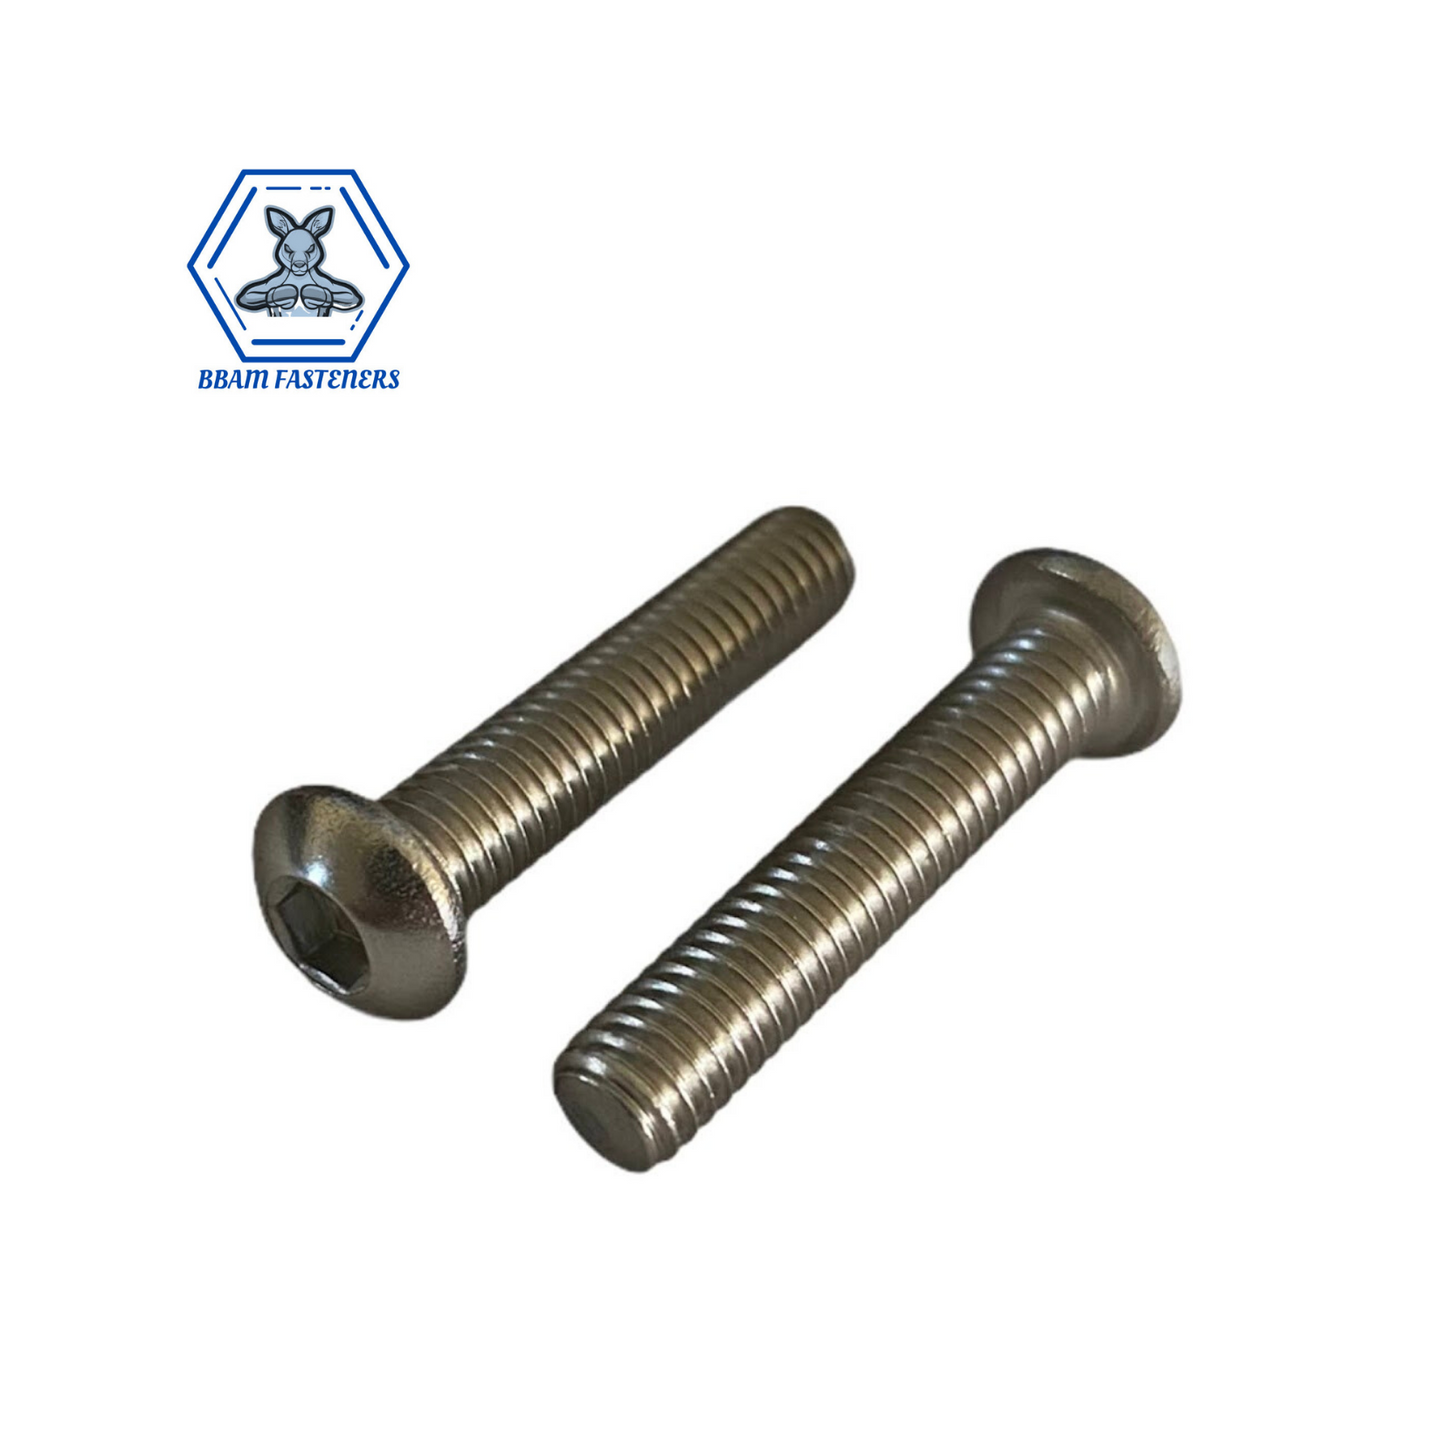 M3 x 8mm Button Socket Screw 304 Stainless Steel